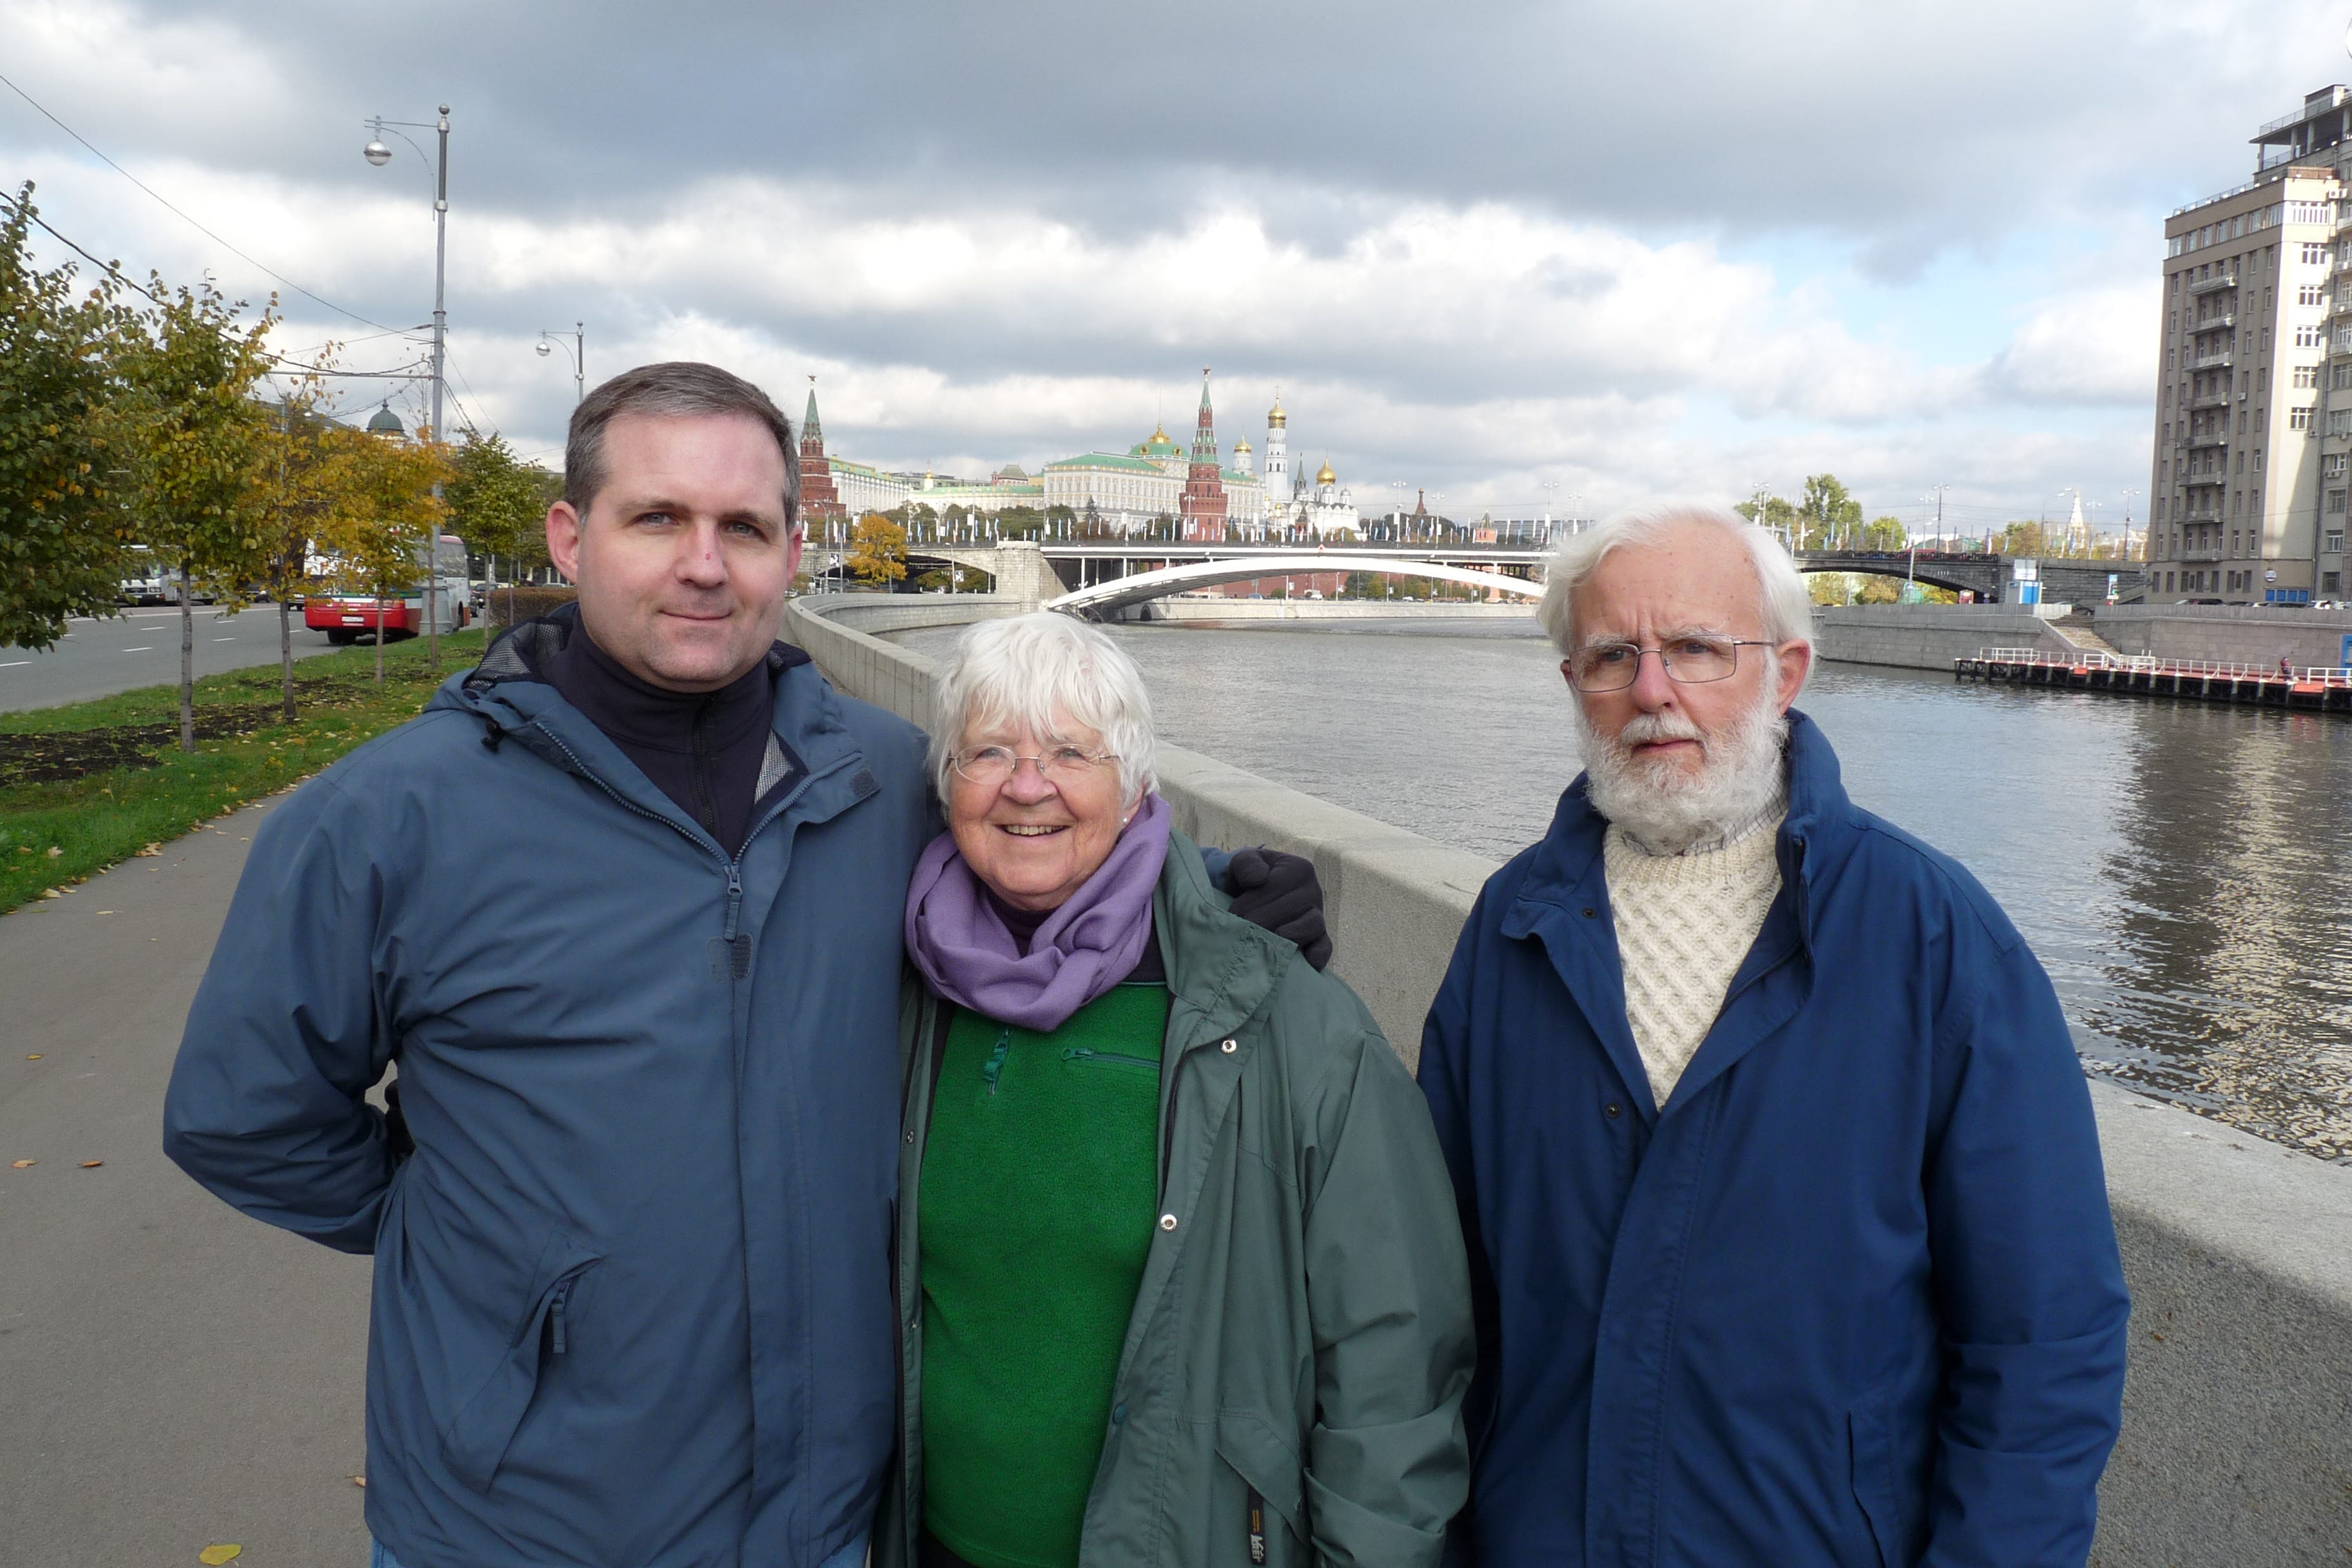 Paul Whelan of Novi poses with his parents, Rosie and Ed Whelan, in this 2009 photo taken in Moscow.